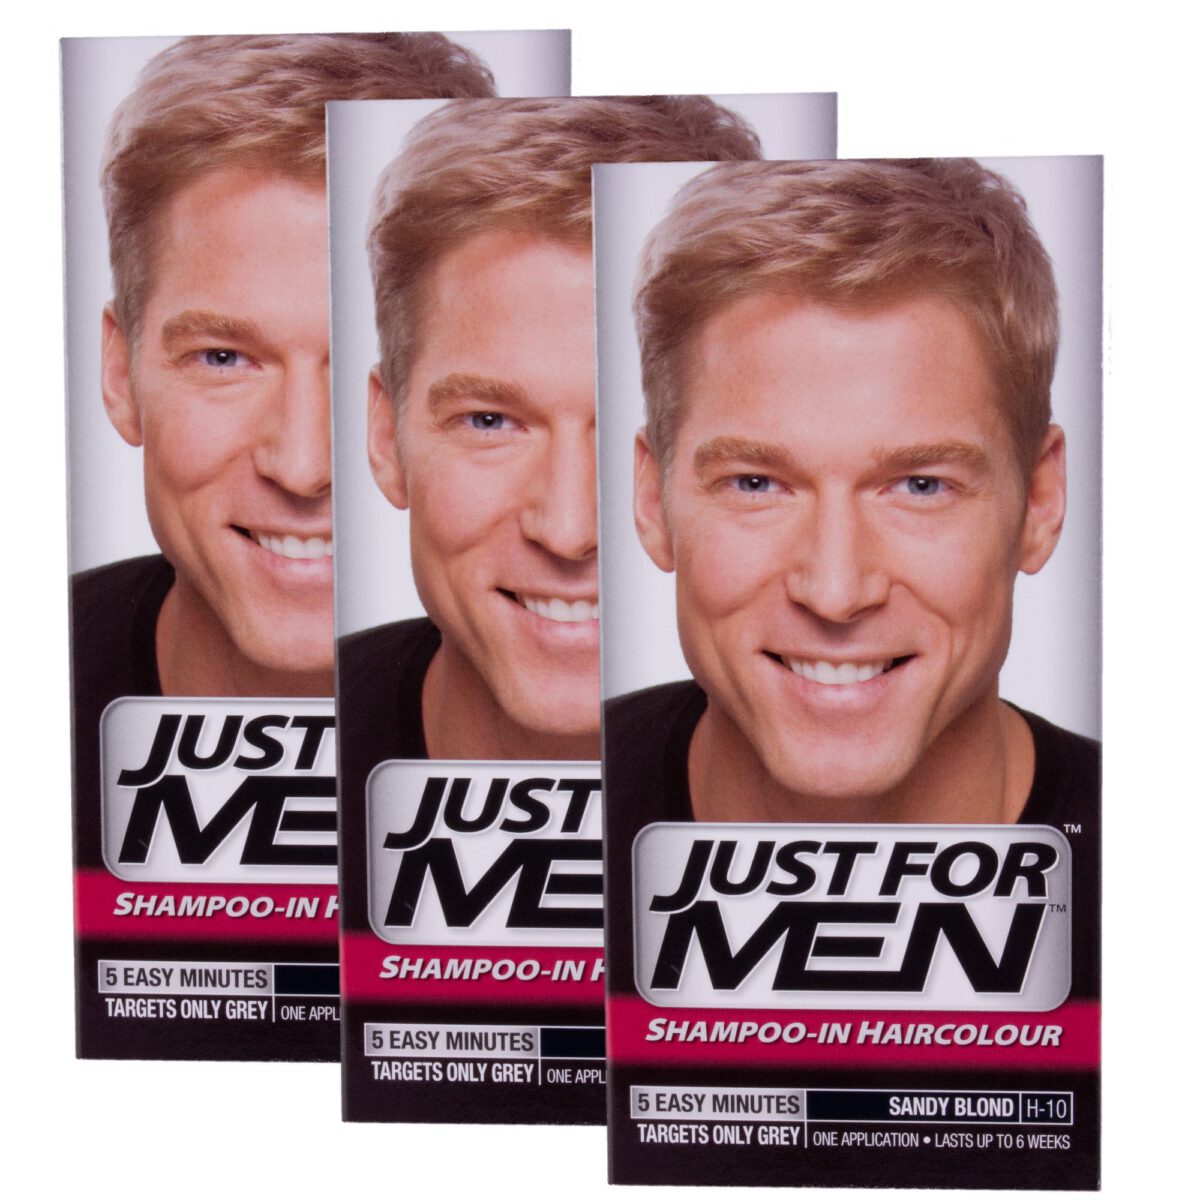 Just for Men